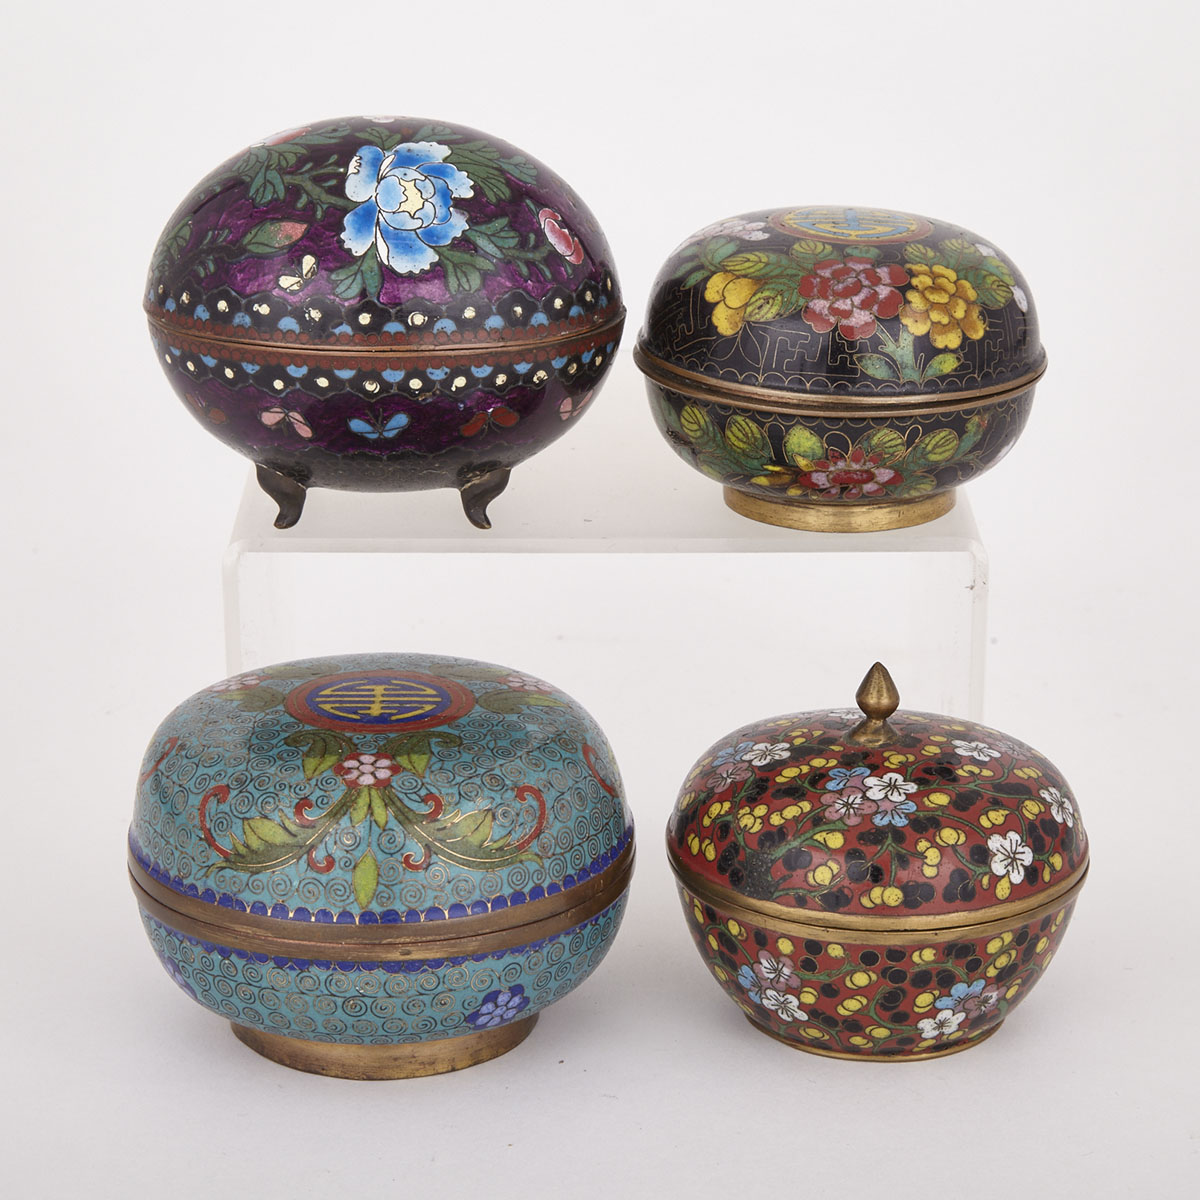 Four Chinese Cloisonne Boxes, Early 20th Century